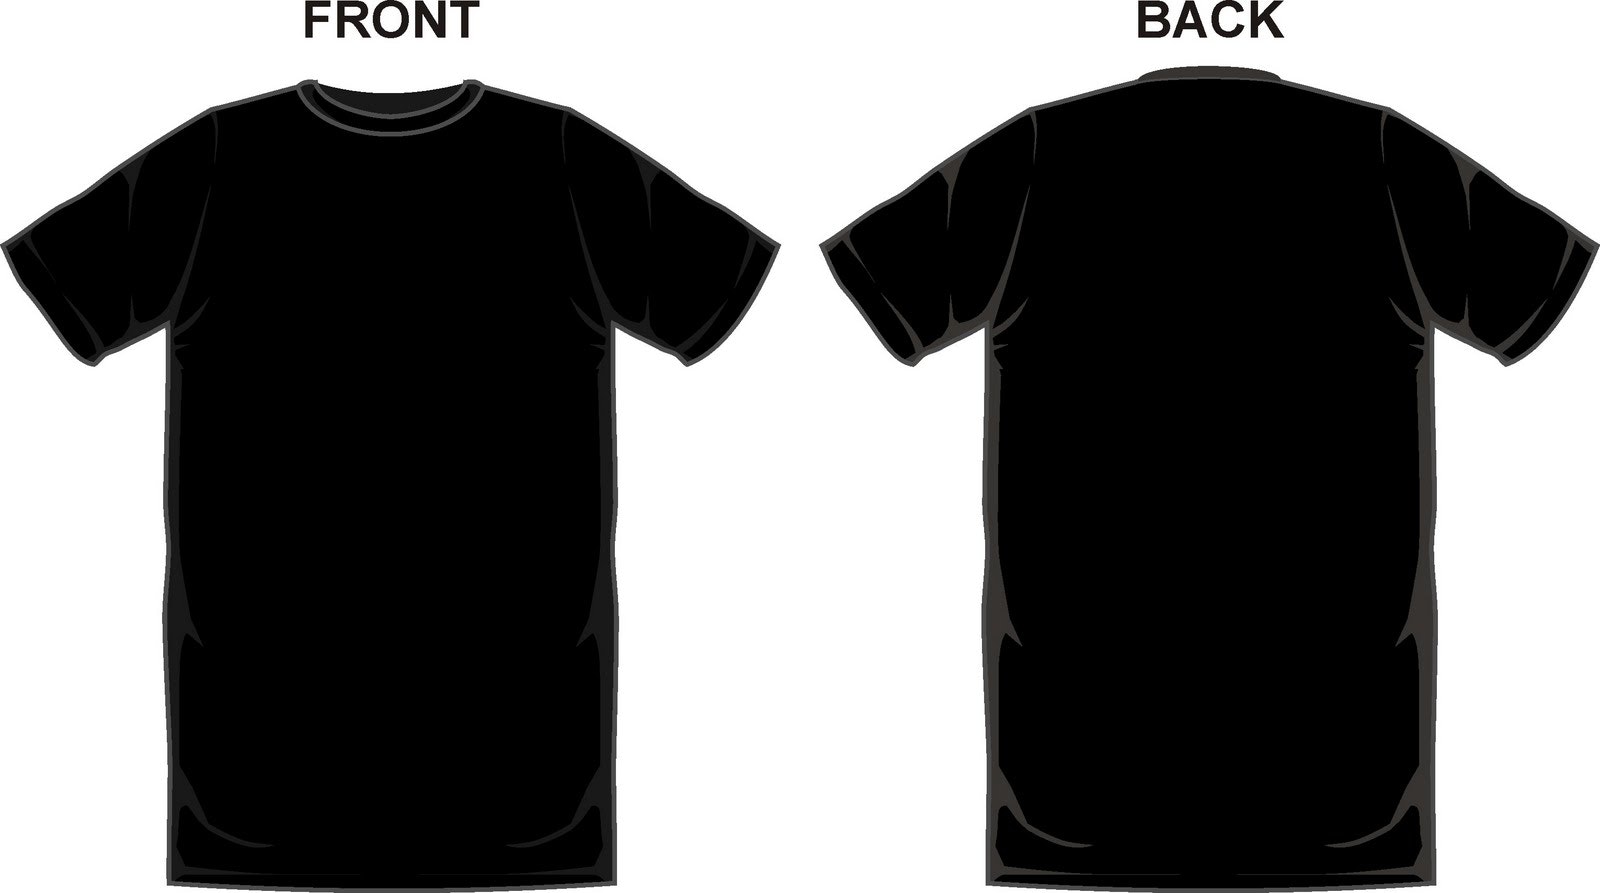 Download 11065+ Black T-Shirt Mockup Front And Back Free Amazing ...